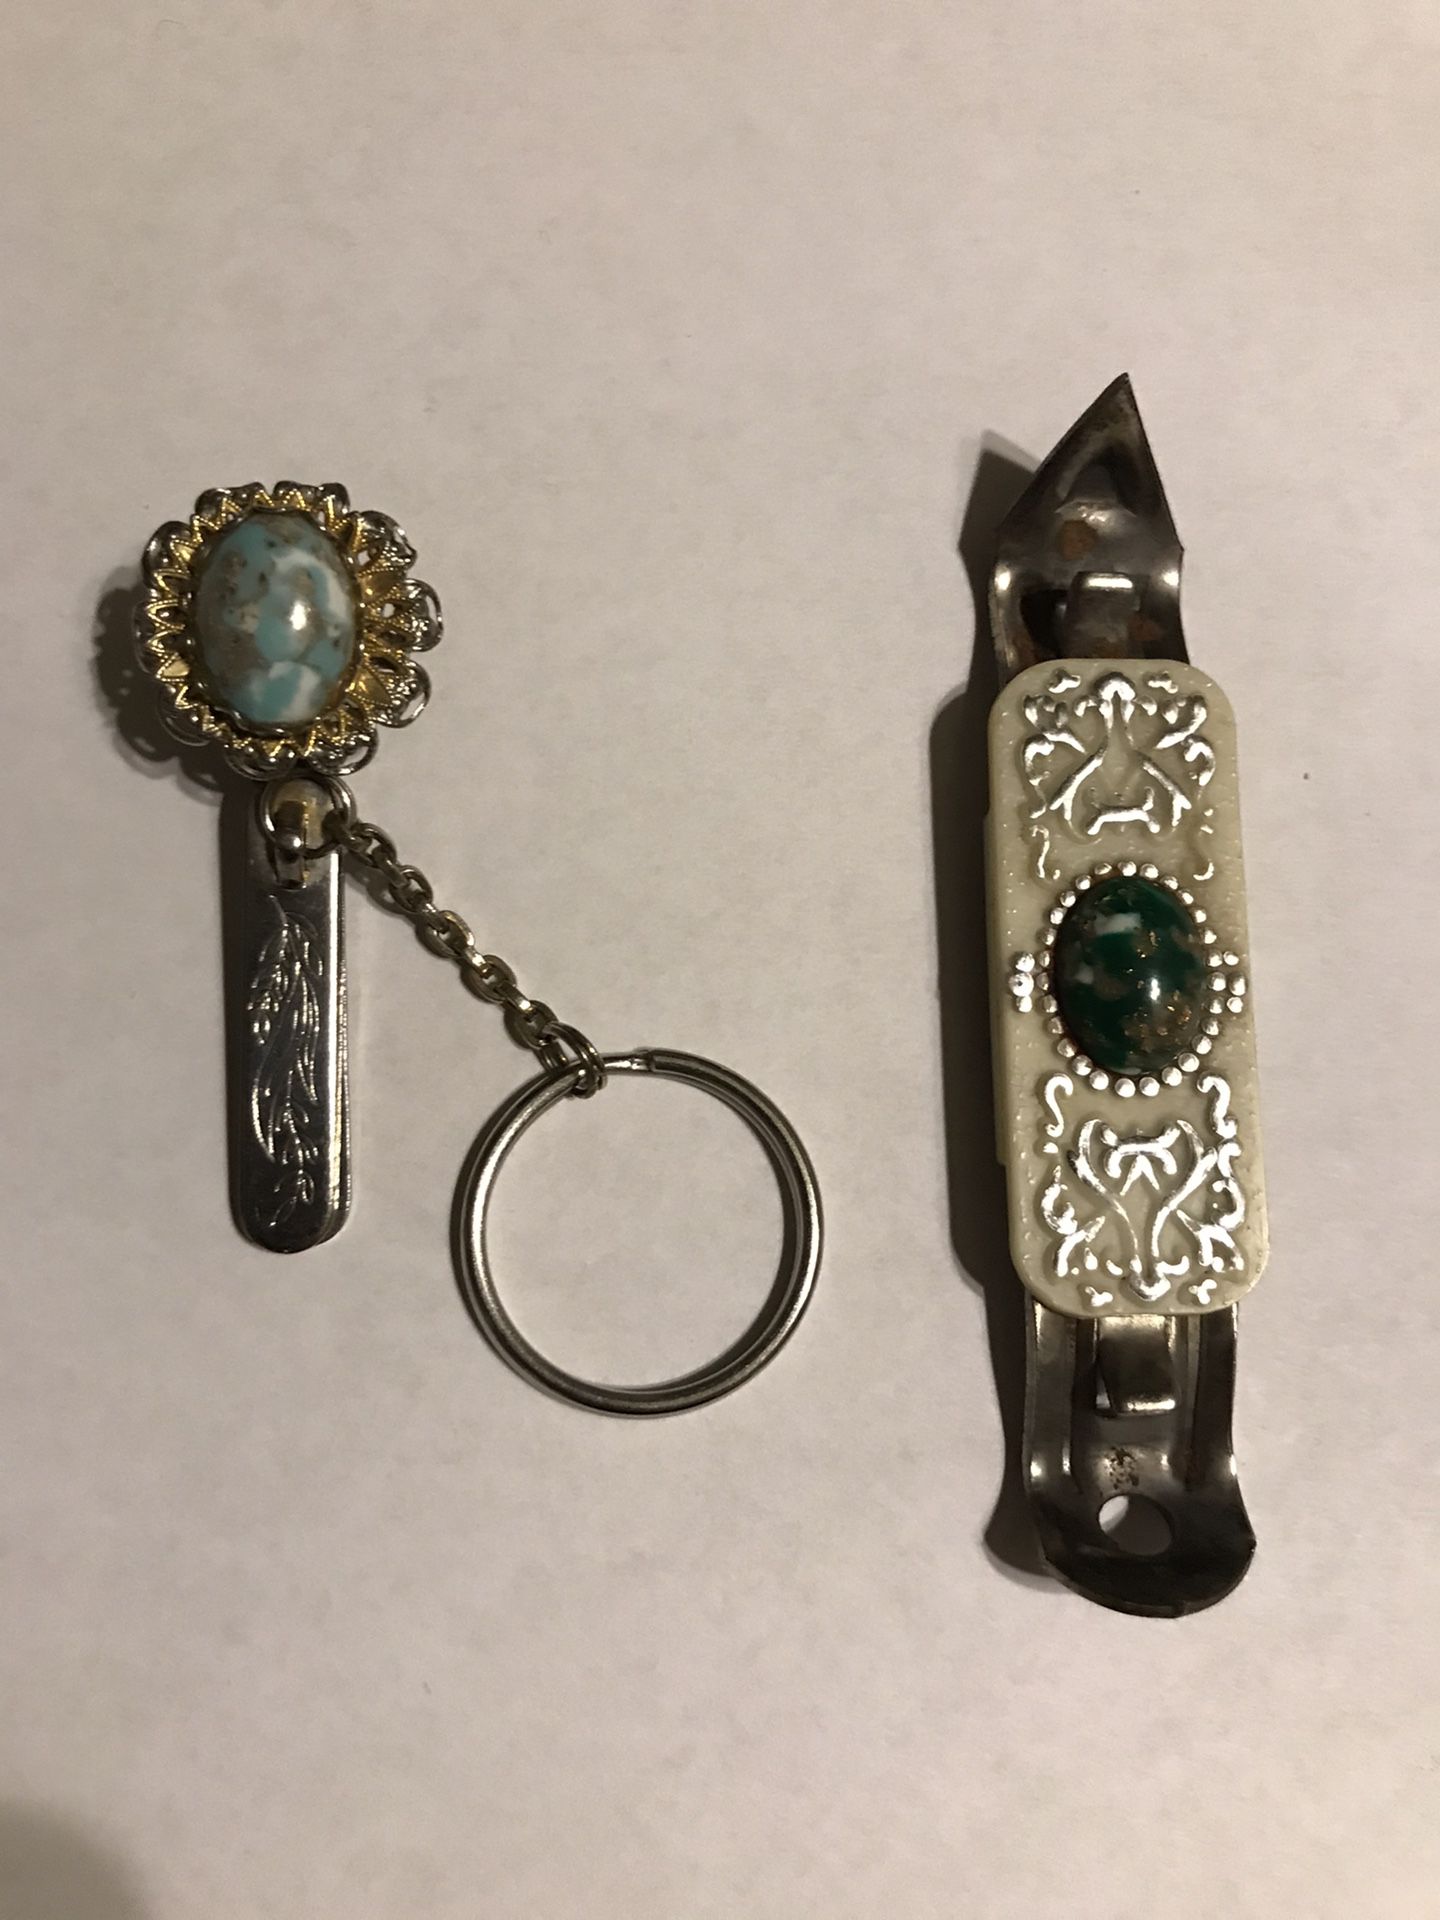 King’s Key Finder Clip W/ Cabochon Stone & Vintage Can Opener W/ Cabochon Stone